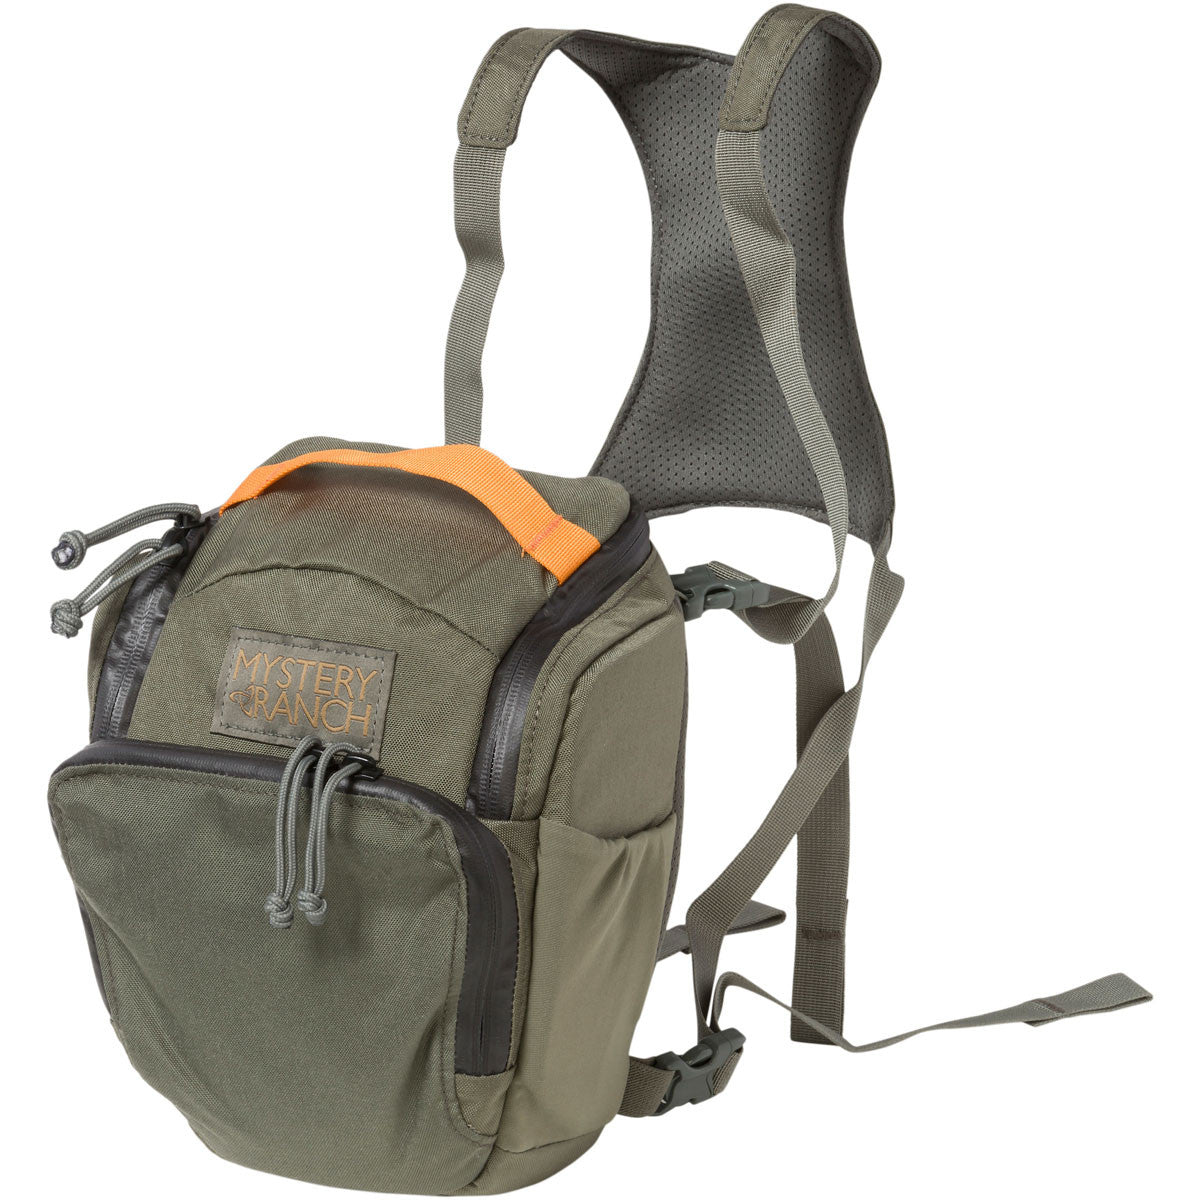 Mystery Ranch DSLR Chest Rig - Foliage -  - Mansfield Hunting & Fishing - Products to prepare for Corona Virus